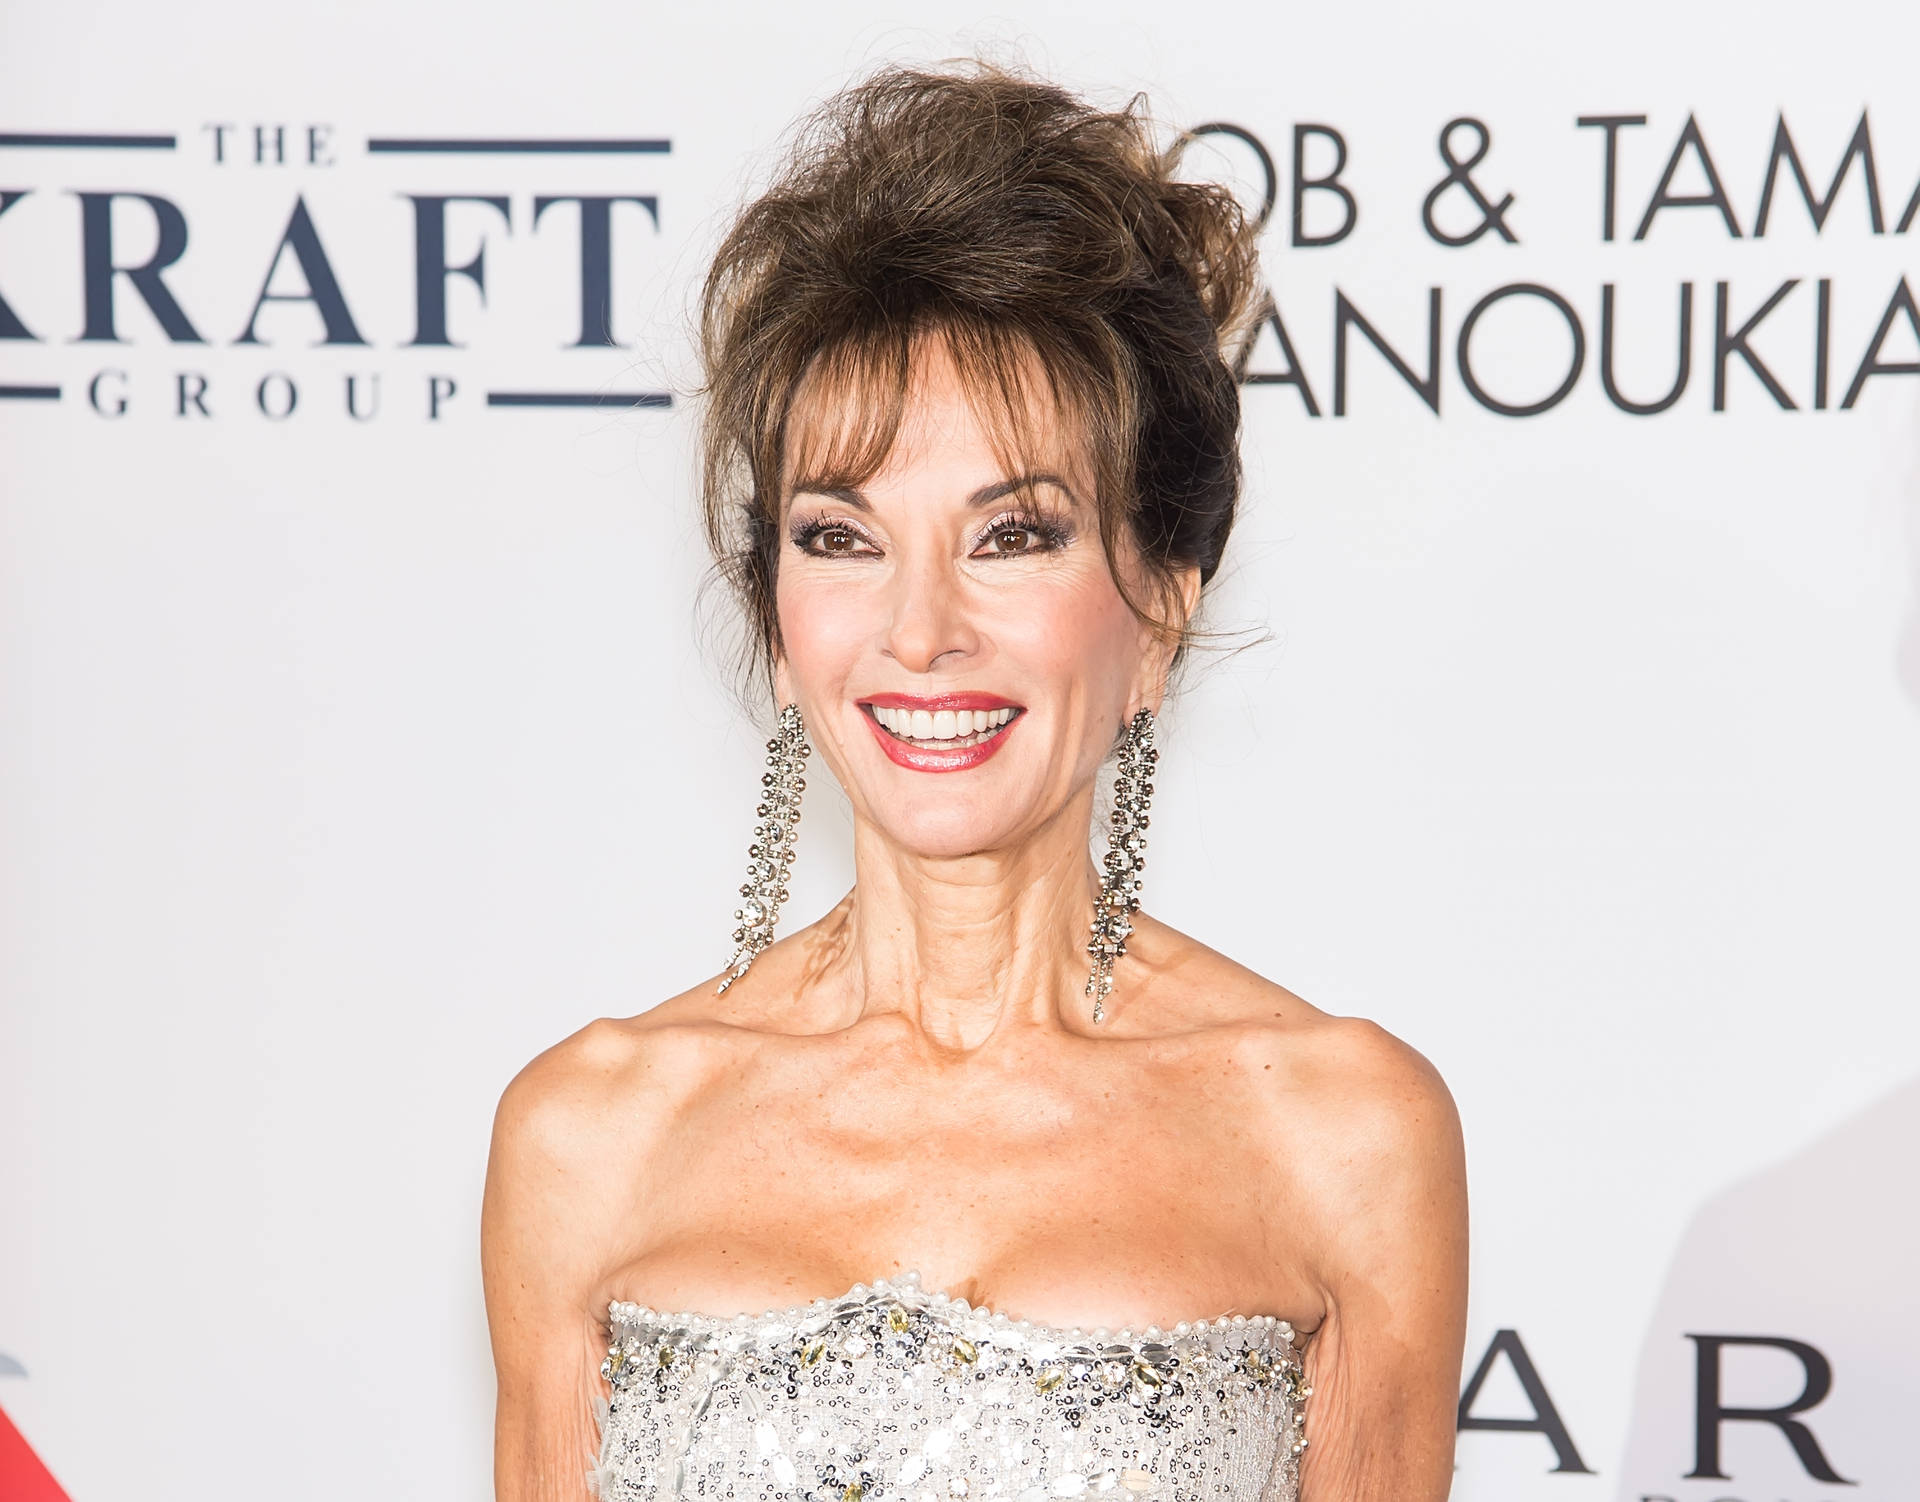 Author Susan Lucci At The Kraft Group Event Picture